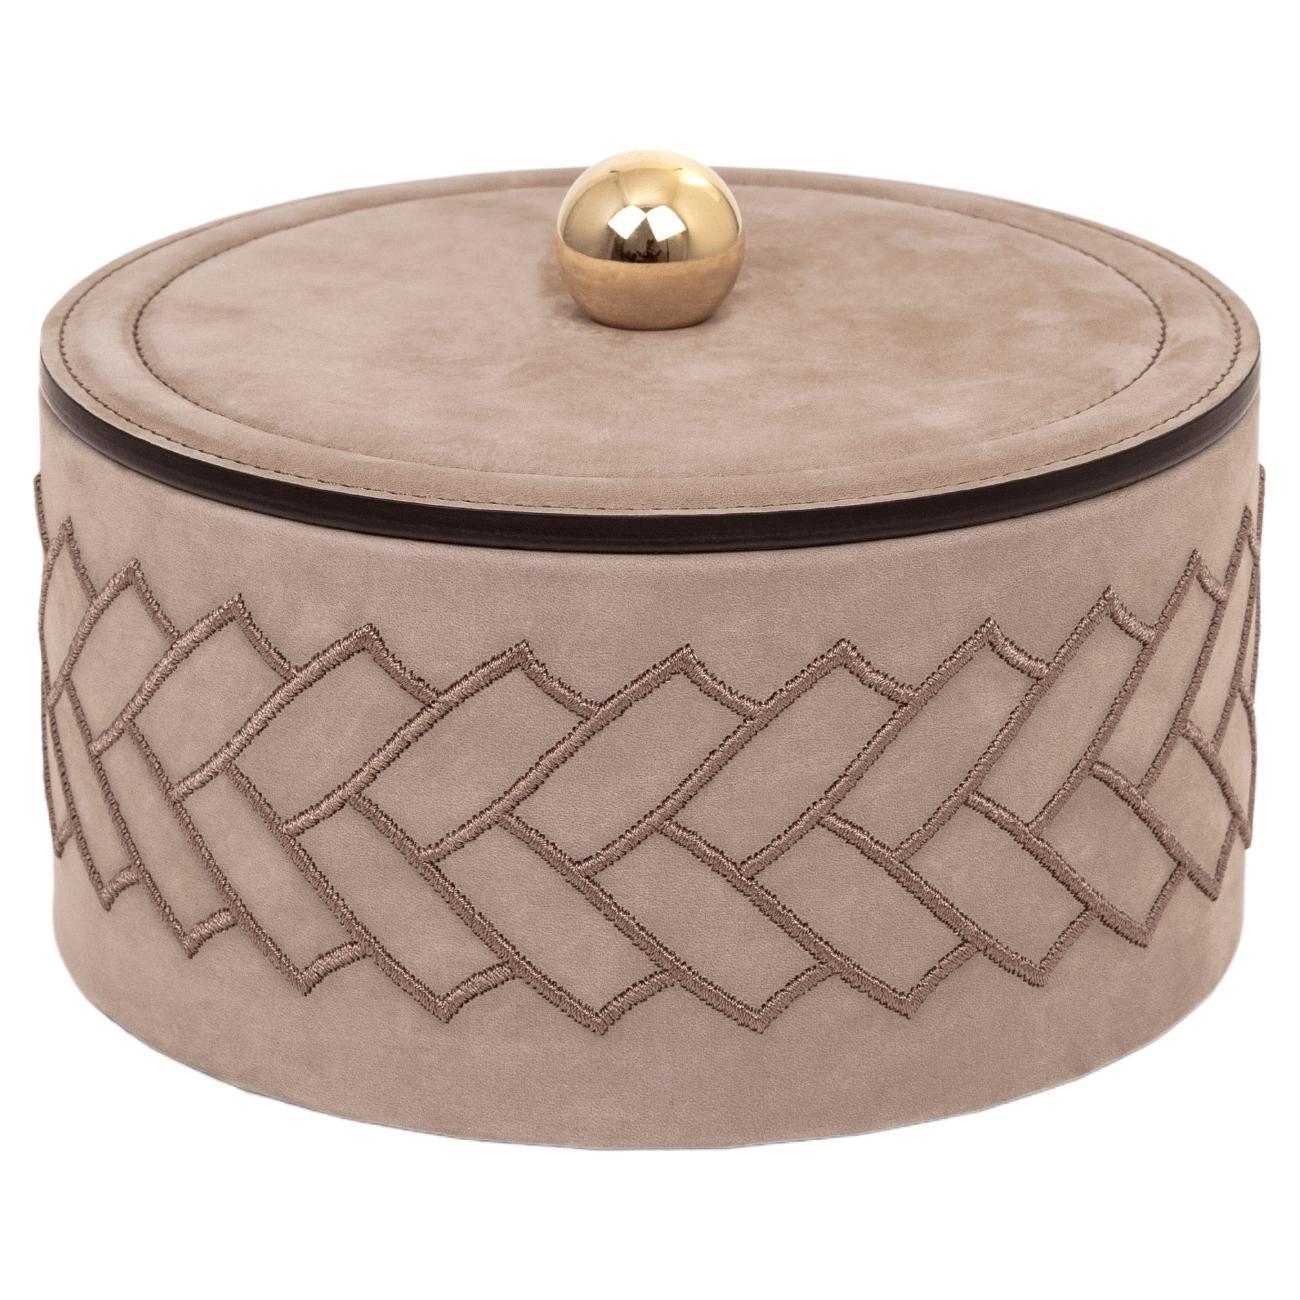 21st Century Lily Decorative Box in Nubuck Leather Handcrafed in Italy